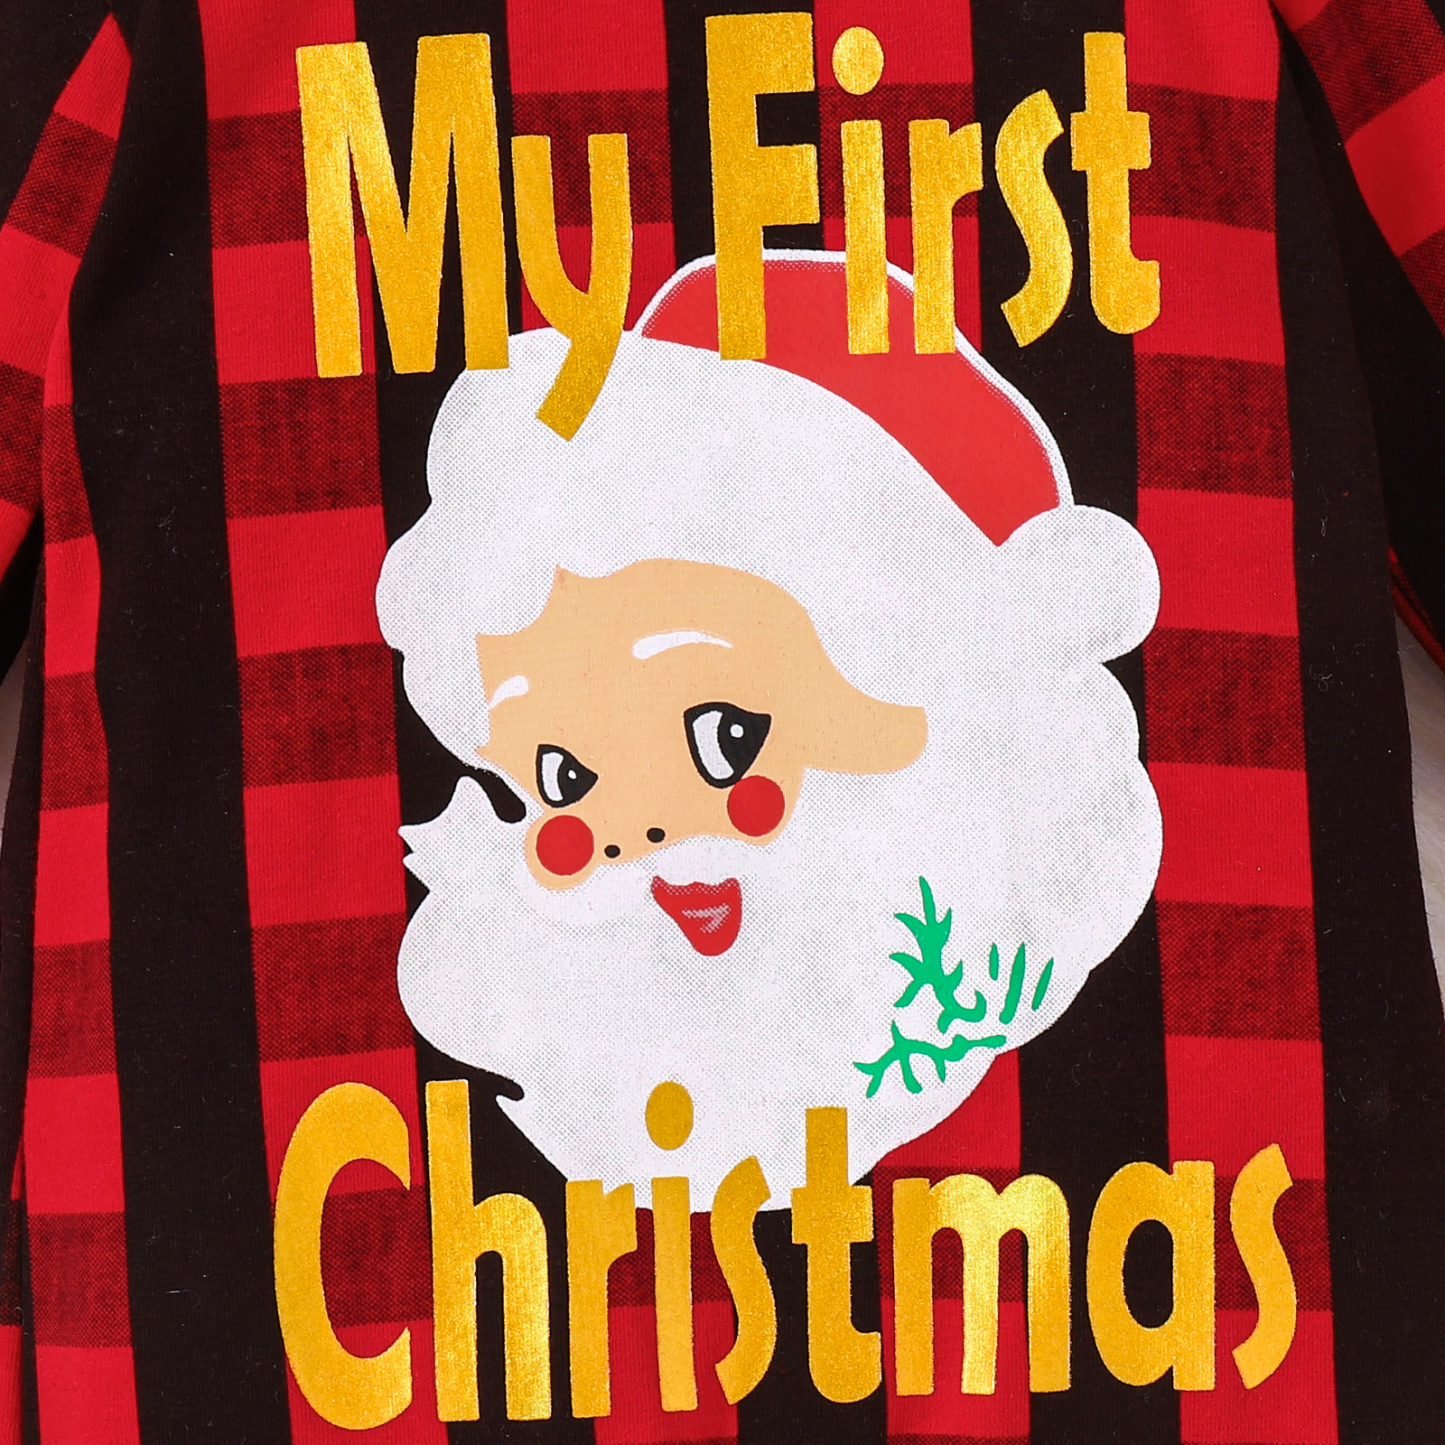 Baby My First Christmas Jumpsuit With Hat